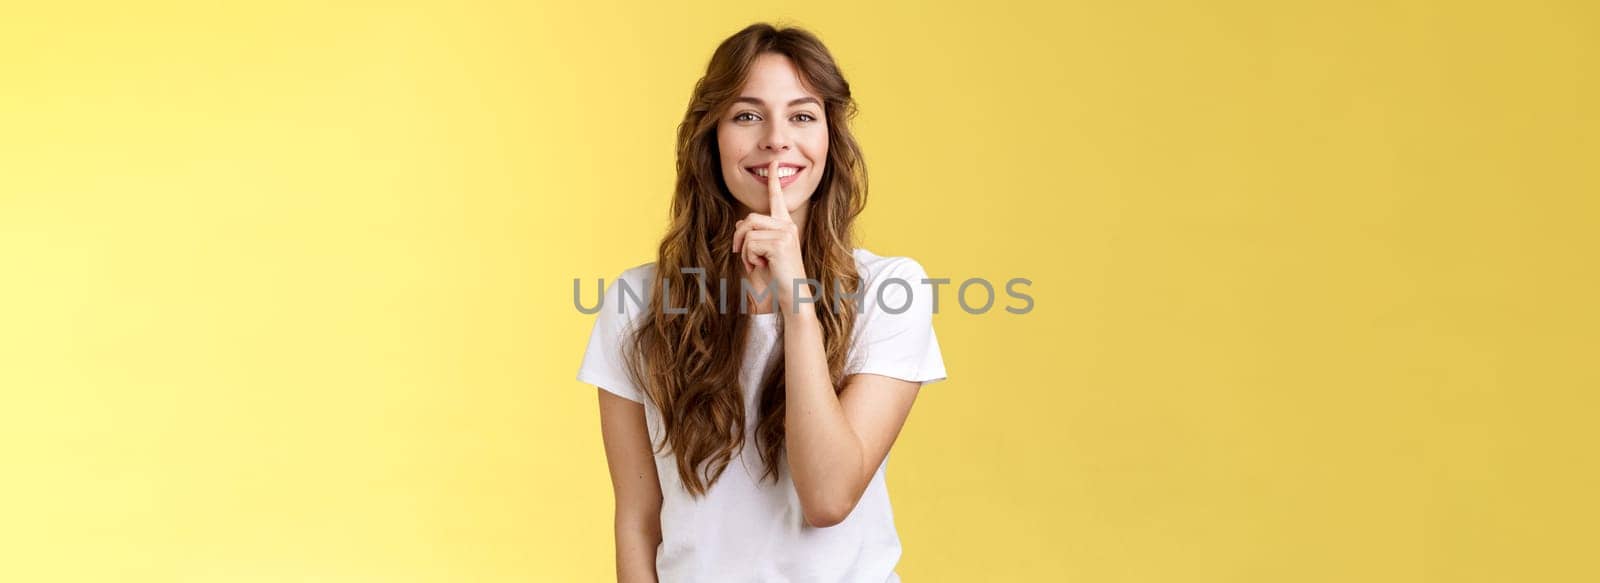 Cute cunning lovely european girl curly hairstyle hiding beauty secret smiling sensually show hush shush gesture index finger pressed lips grinning joyfully stand yellow background.